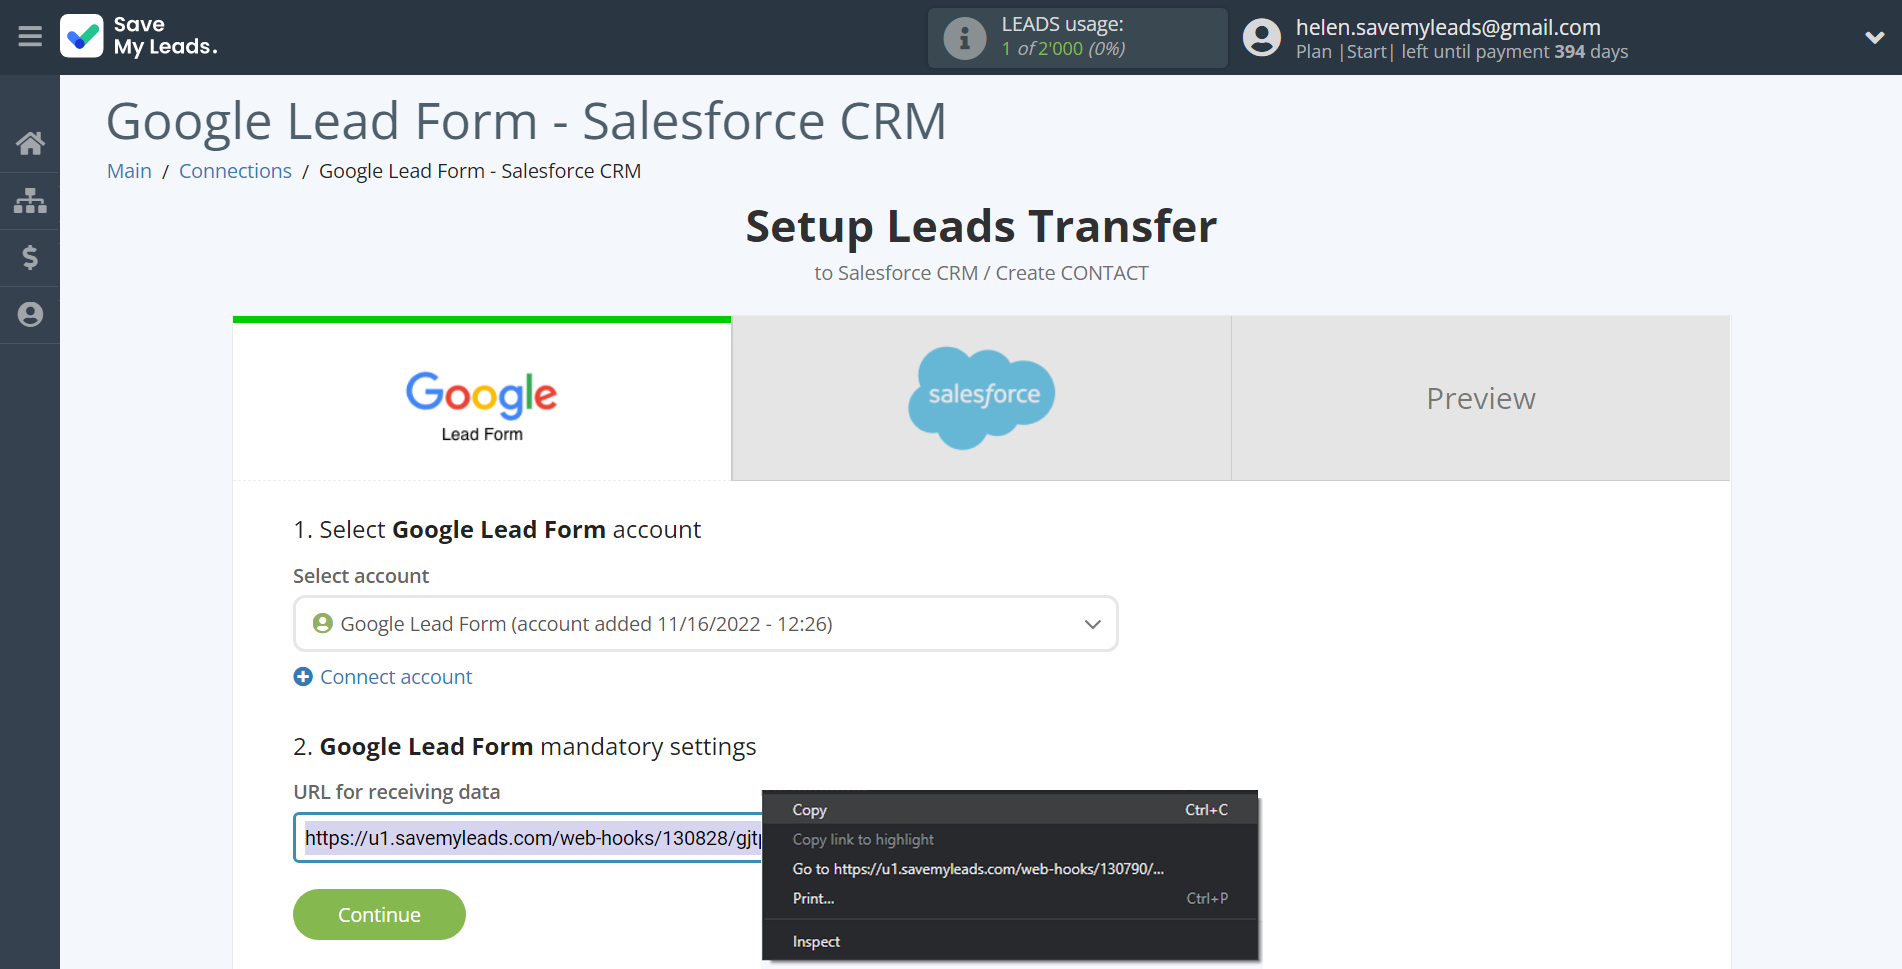 How to Connect Google Lead Form with Salesforce CRM Create Contacts | Data Source account connection